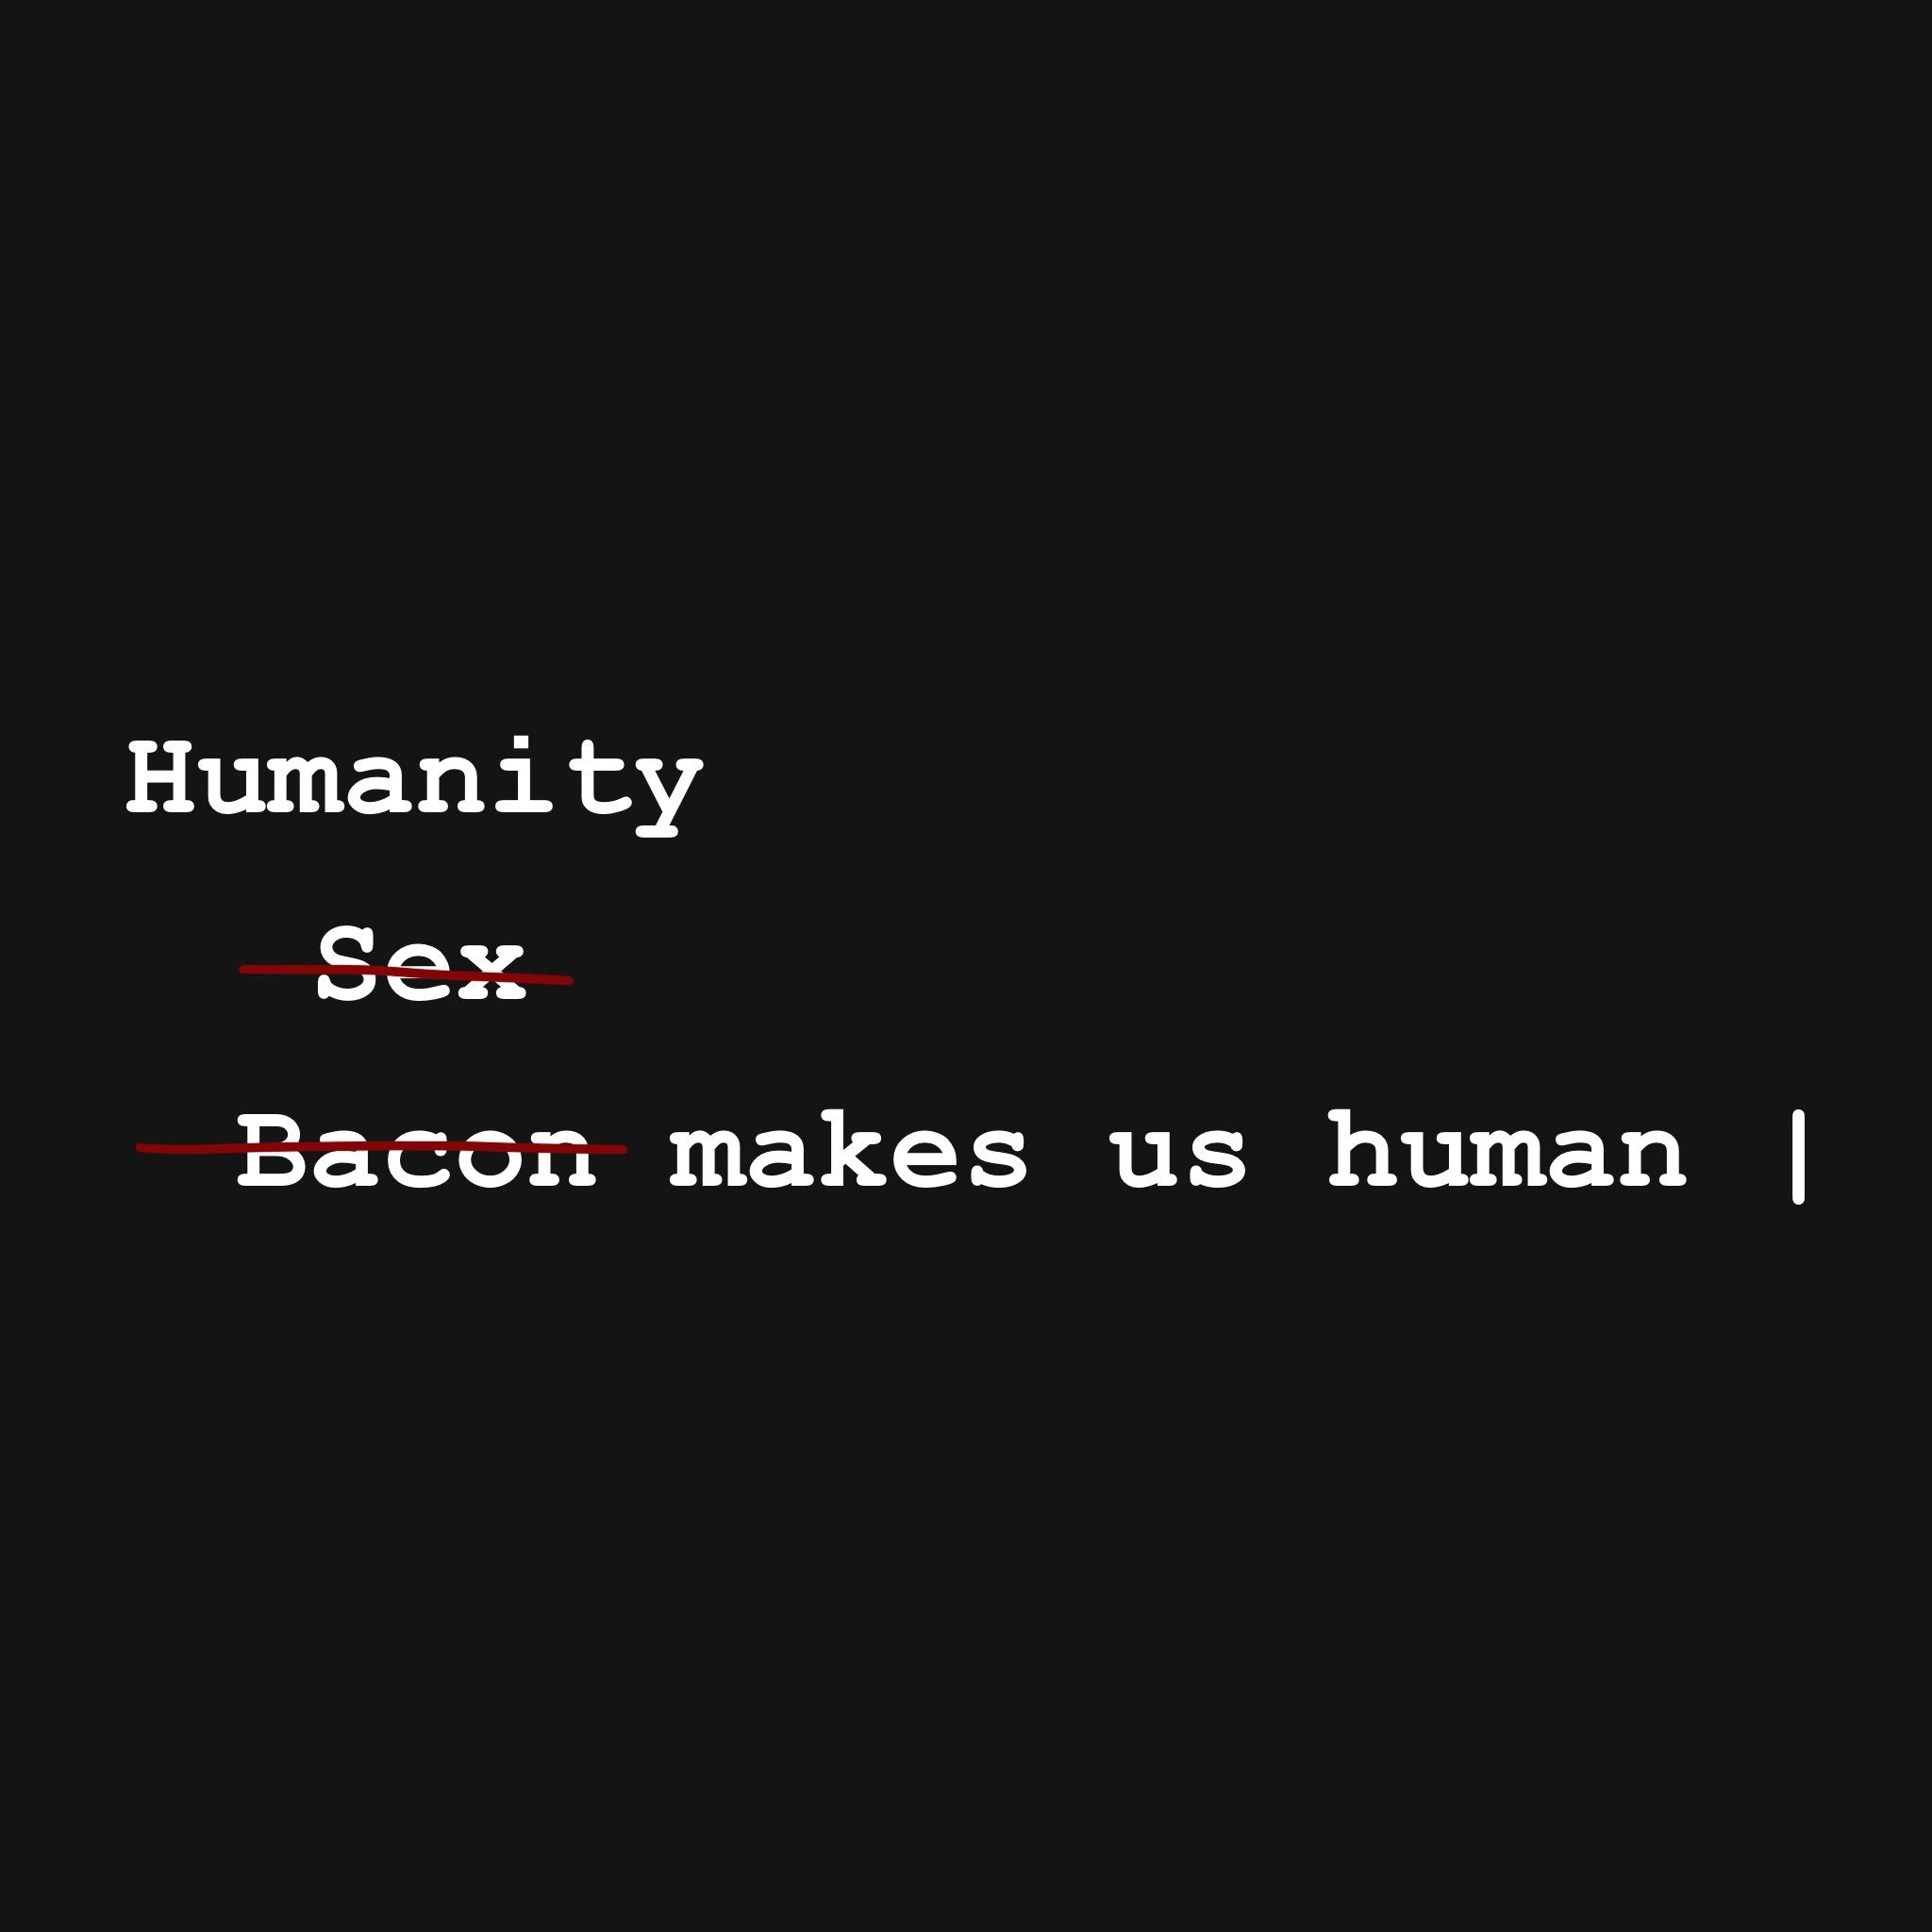 A black background text on it reading 'Bacon makes us human'. Bacon is crossed out and replaced with 'sex', which is also crossed out to finally be replaced by 'humanity'.